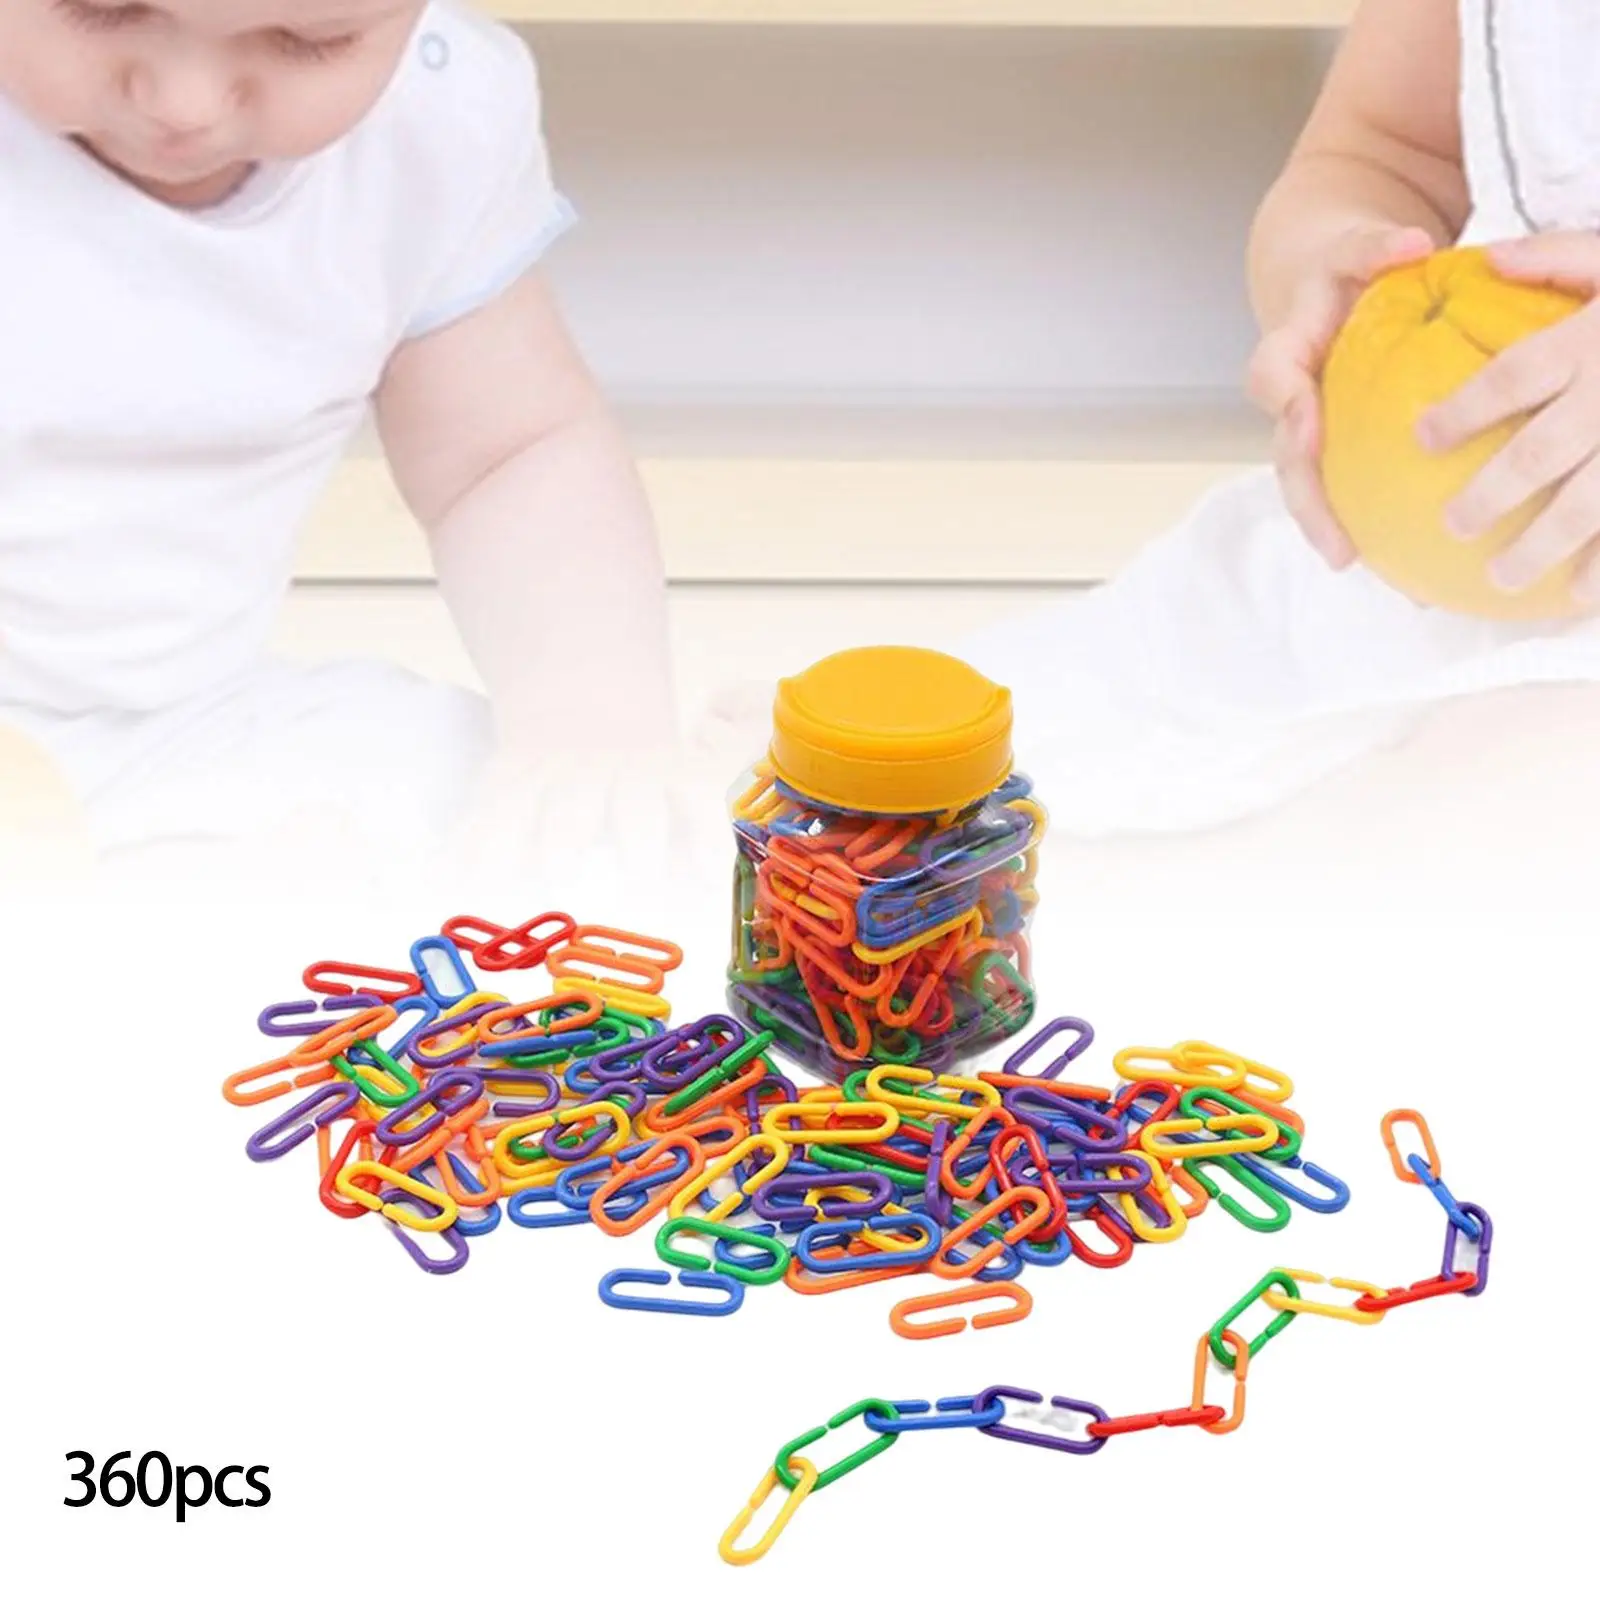 Colorful Hooks Chain Links Bird Cage Chain Color Cognitive Crafts Connected Buckle Easy Interconnecting